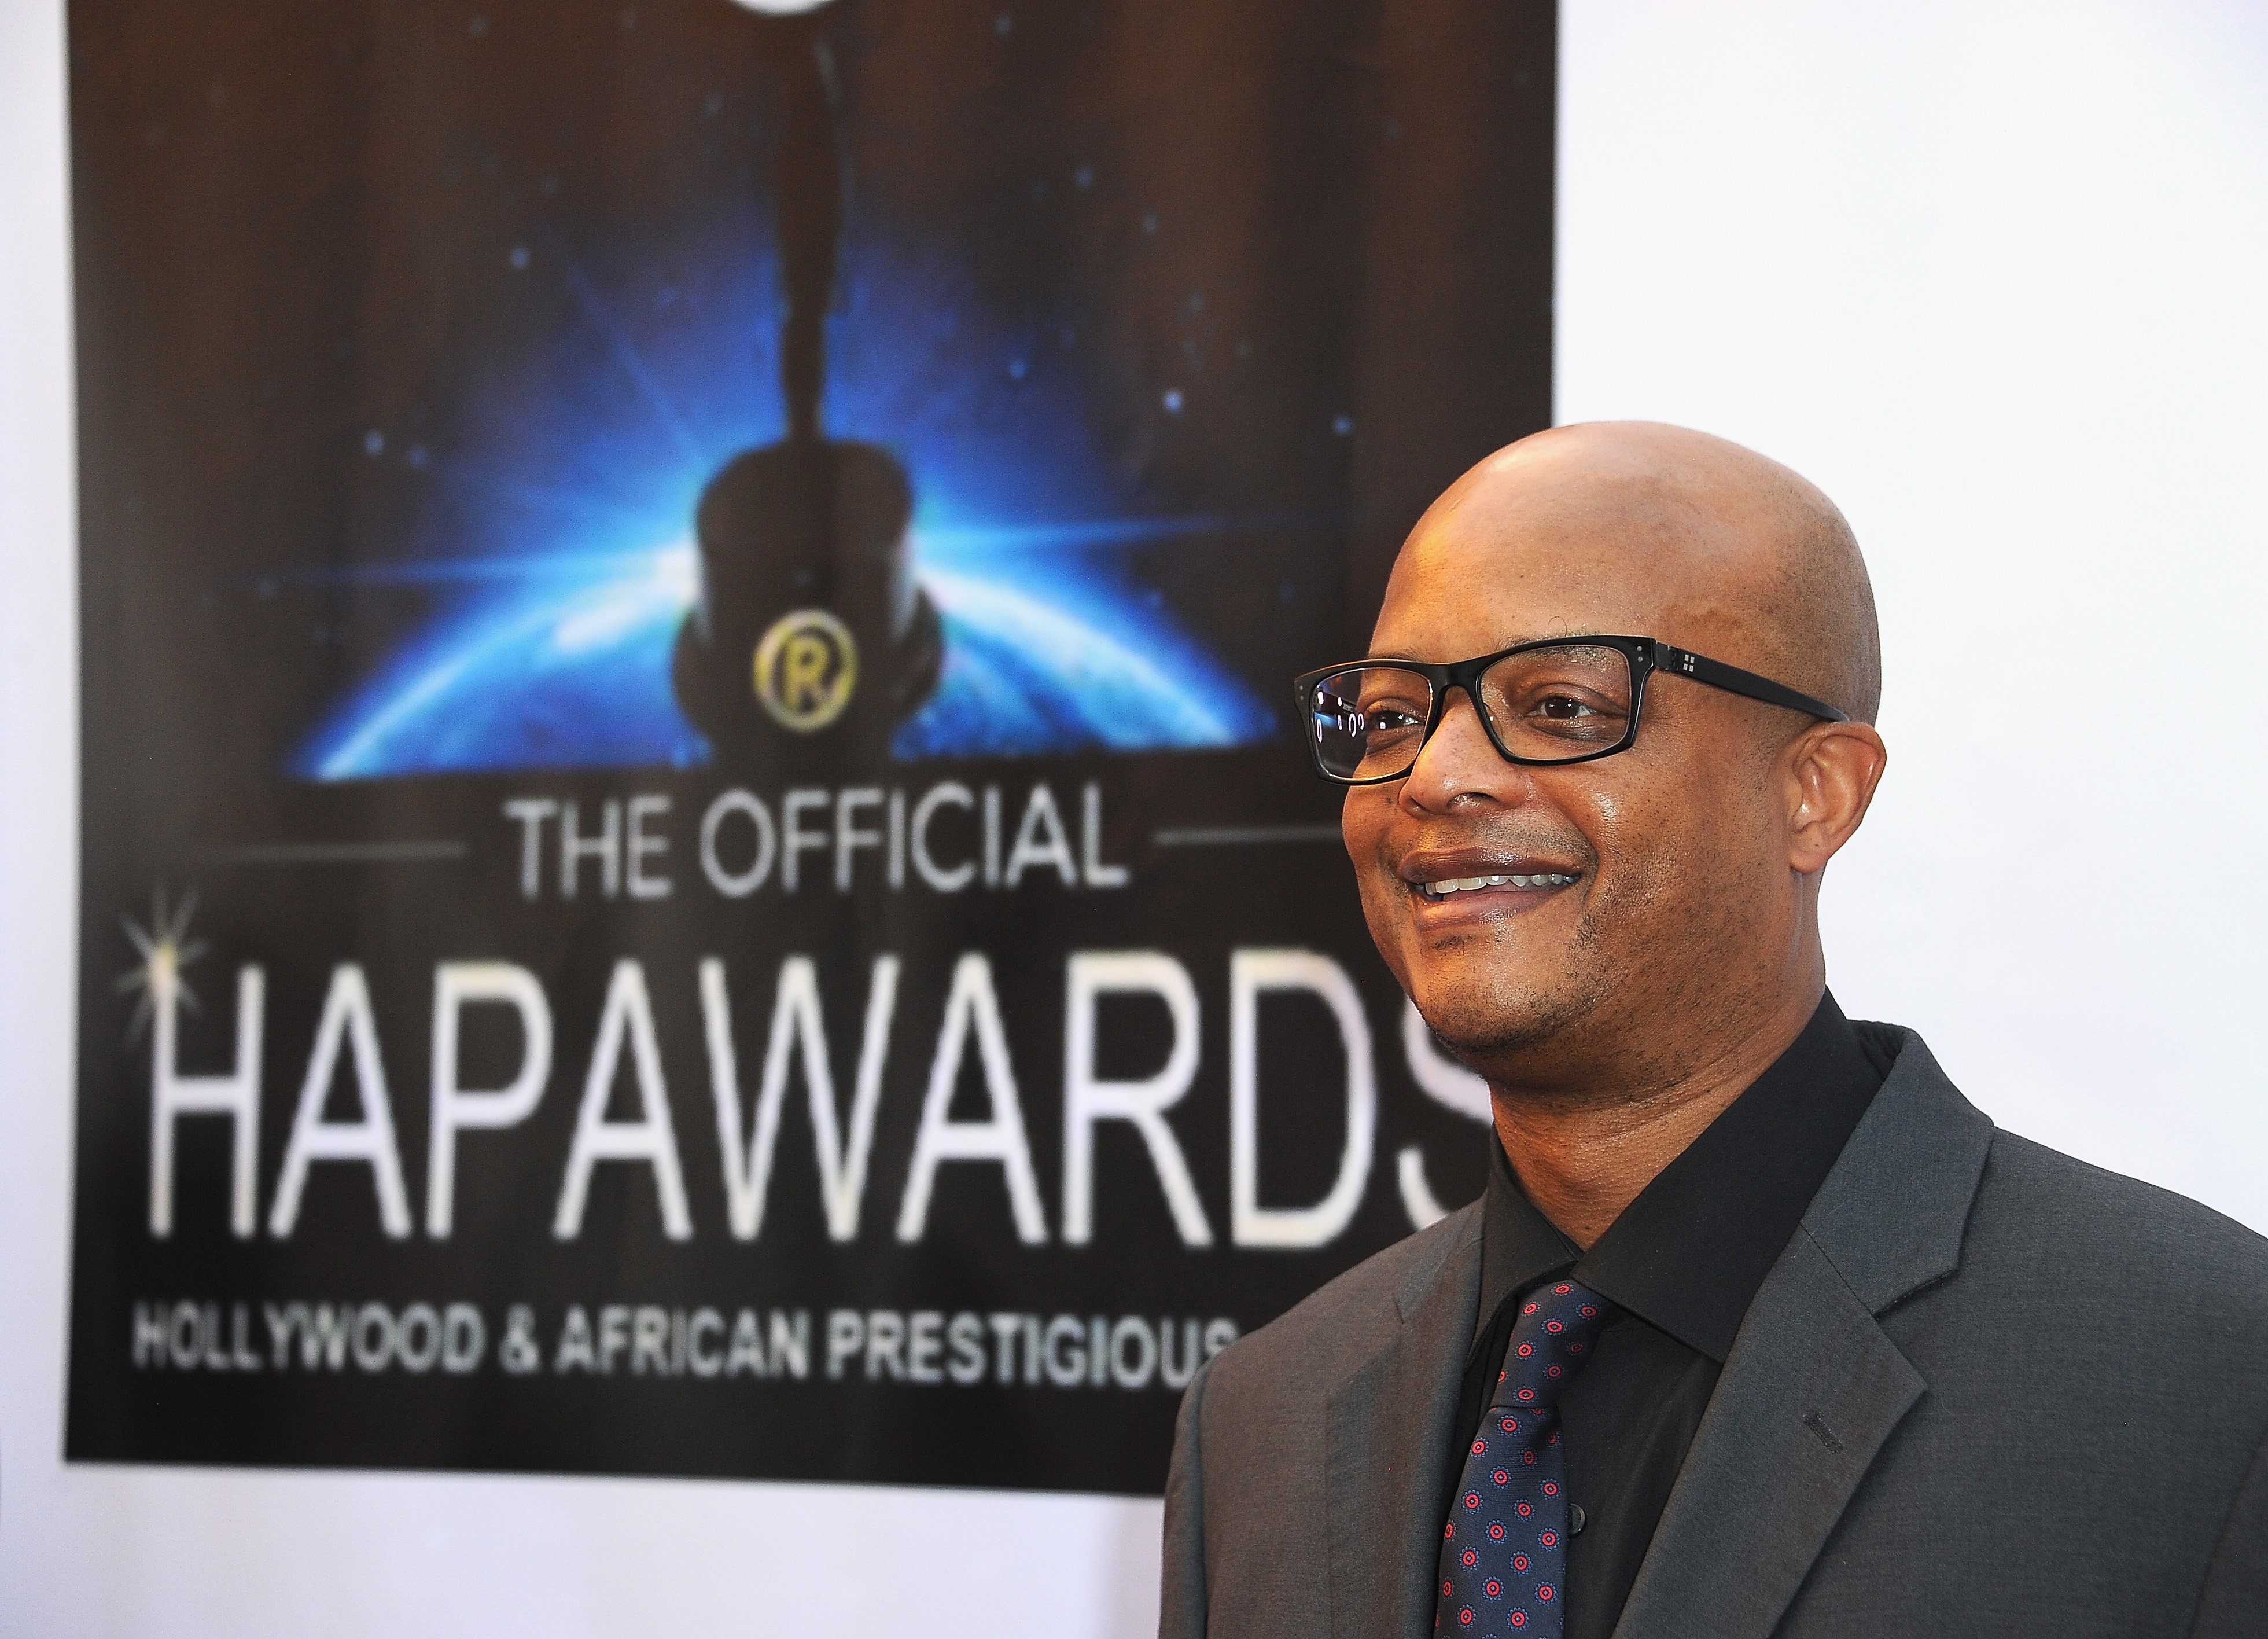 Todd Bridges at the 2nd Annual HAPAwards on September 30, 2018, in Glendale, California | Source: Getty Images